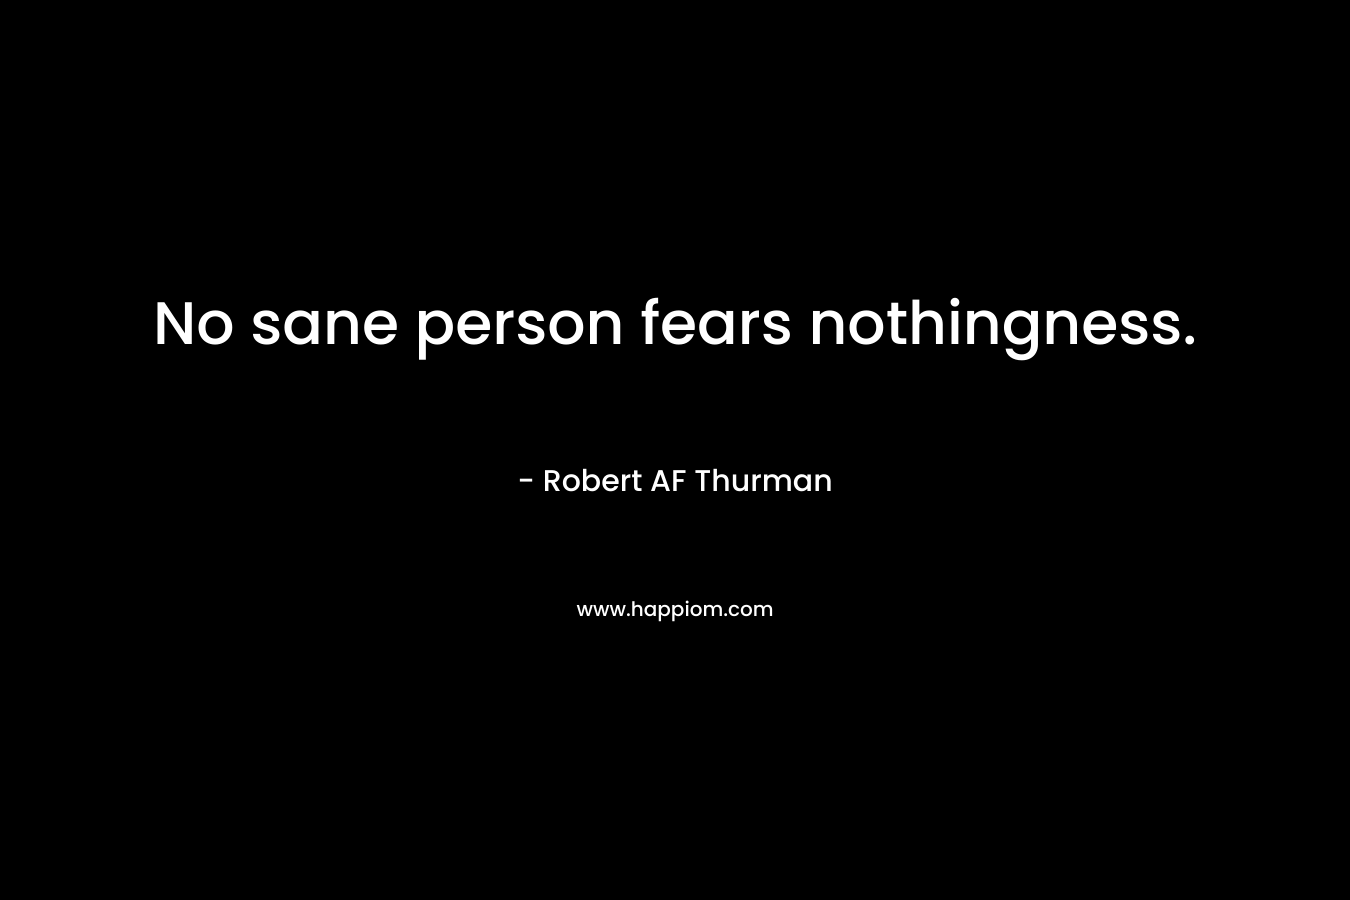 No sane person fears nothingness. – Robert AF Thurman